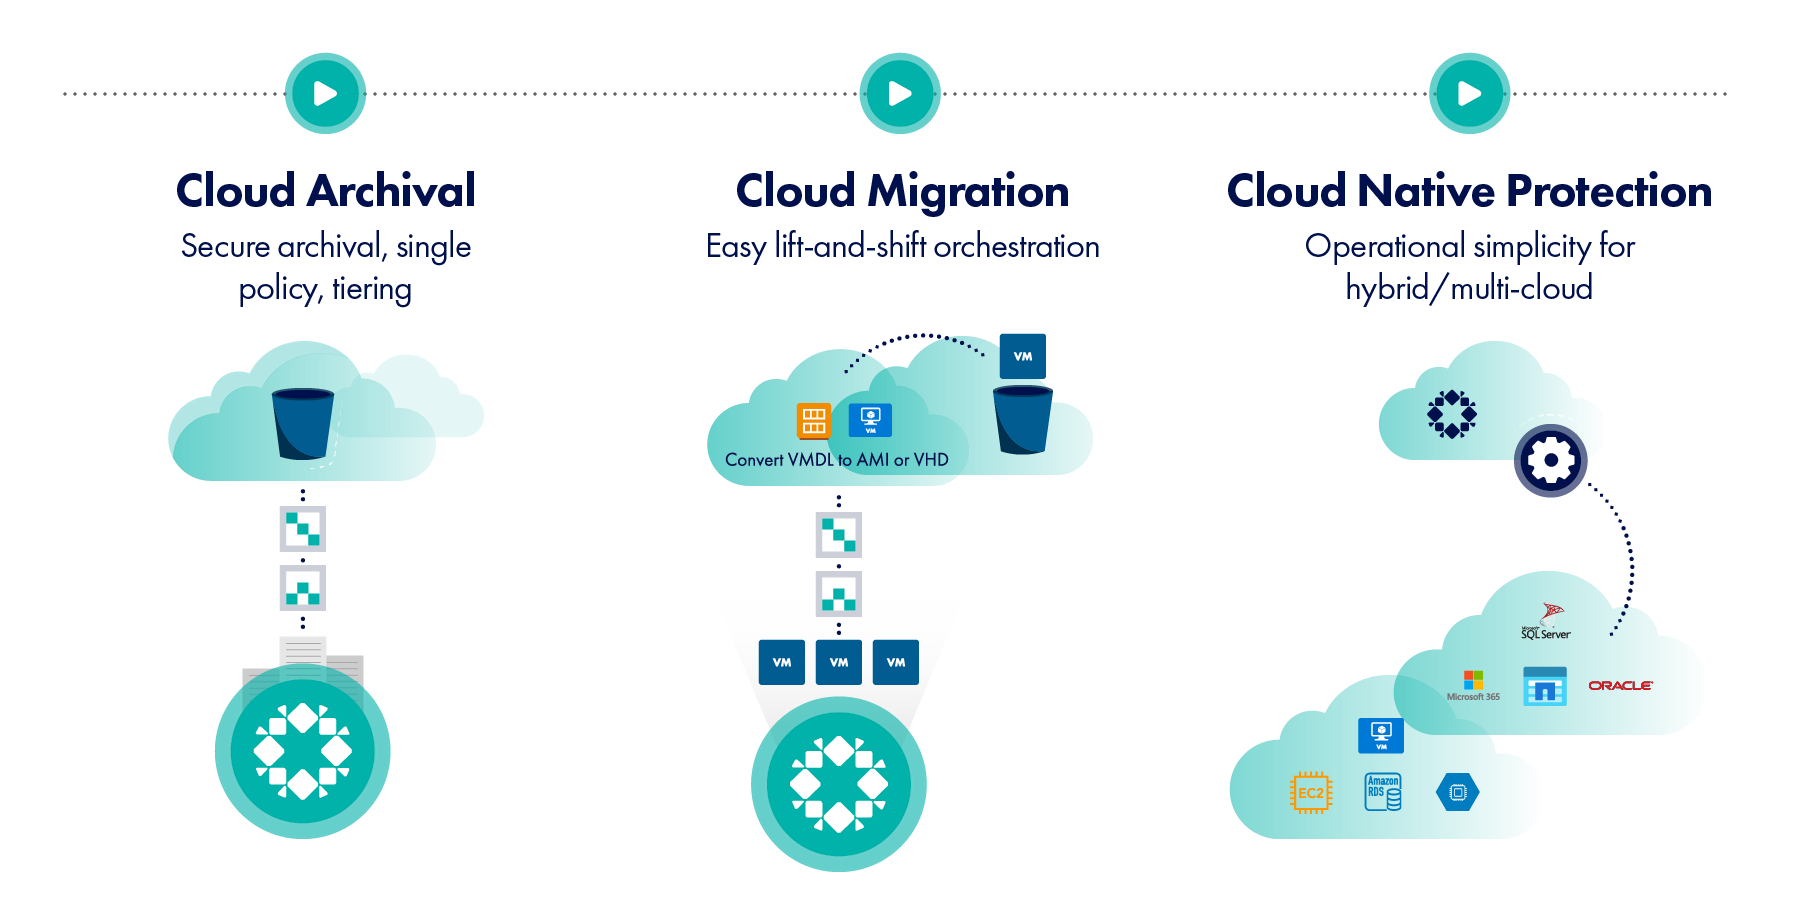 Enable your Cloud Journey